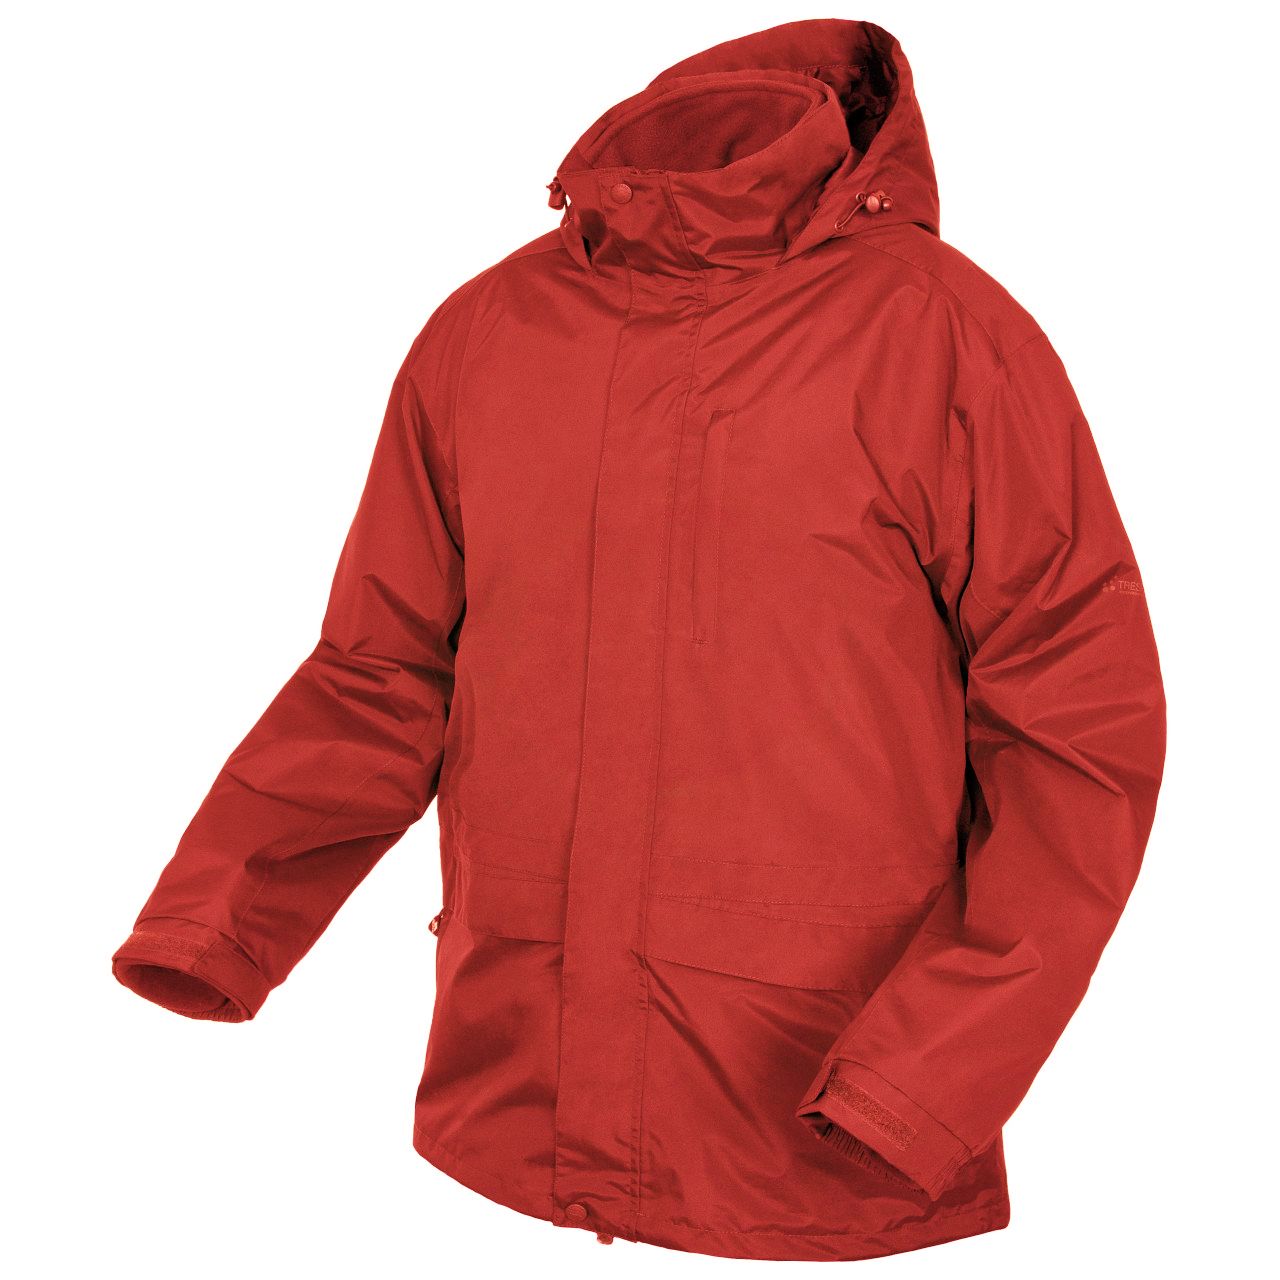 Part mesh, part polyester lining. Tres-Shield® fabric is waterproof 3000mm and windproof. Taped seams. Concealed, lined adjustable hood. Collar high full length zip with tear release storm flap and chin guard. Right chest zipped pocket. Two double entry front pockets. Inner pocket. Part elasticated, adjustable cuffs. Adjustable drawcord at waist and hem. Removable 220gsm anti-pill Polyester fleece inner. Full length zip. Fleece cuffs. Two front zipped pockets. Drawcord at hem. Shaped fit. Branding to back collar and right sleeve on outer fleece. Access for decoration on outer. Material: 100% brushed Polyester outer with PVC coating. Chest to fit (Inches): 10- 34, 12- 36, 14- 38, 16- 40, 18- 42, 20- 44.